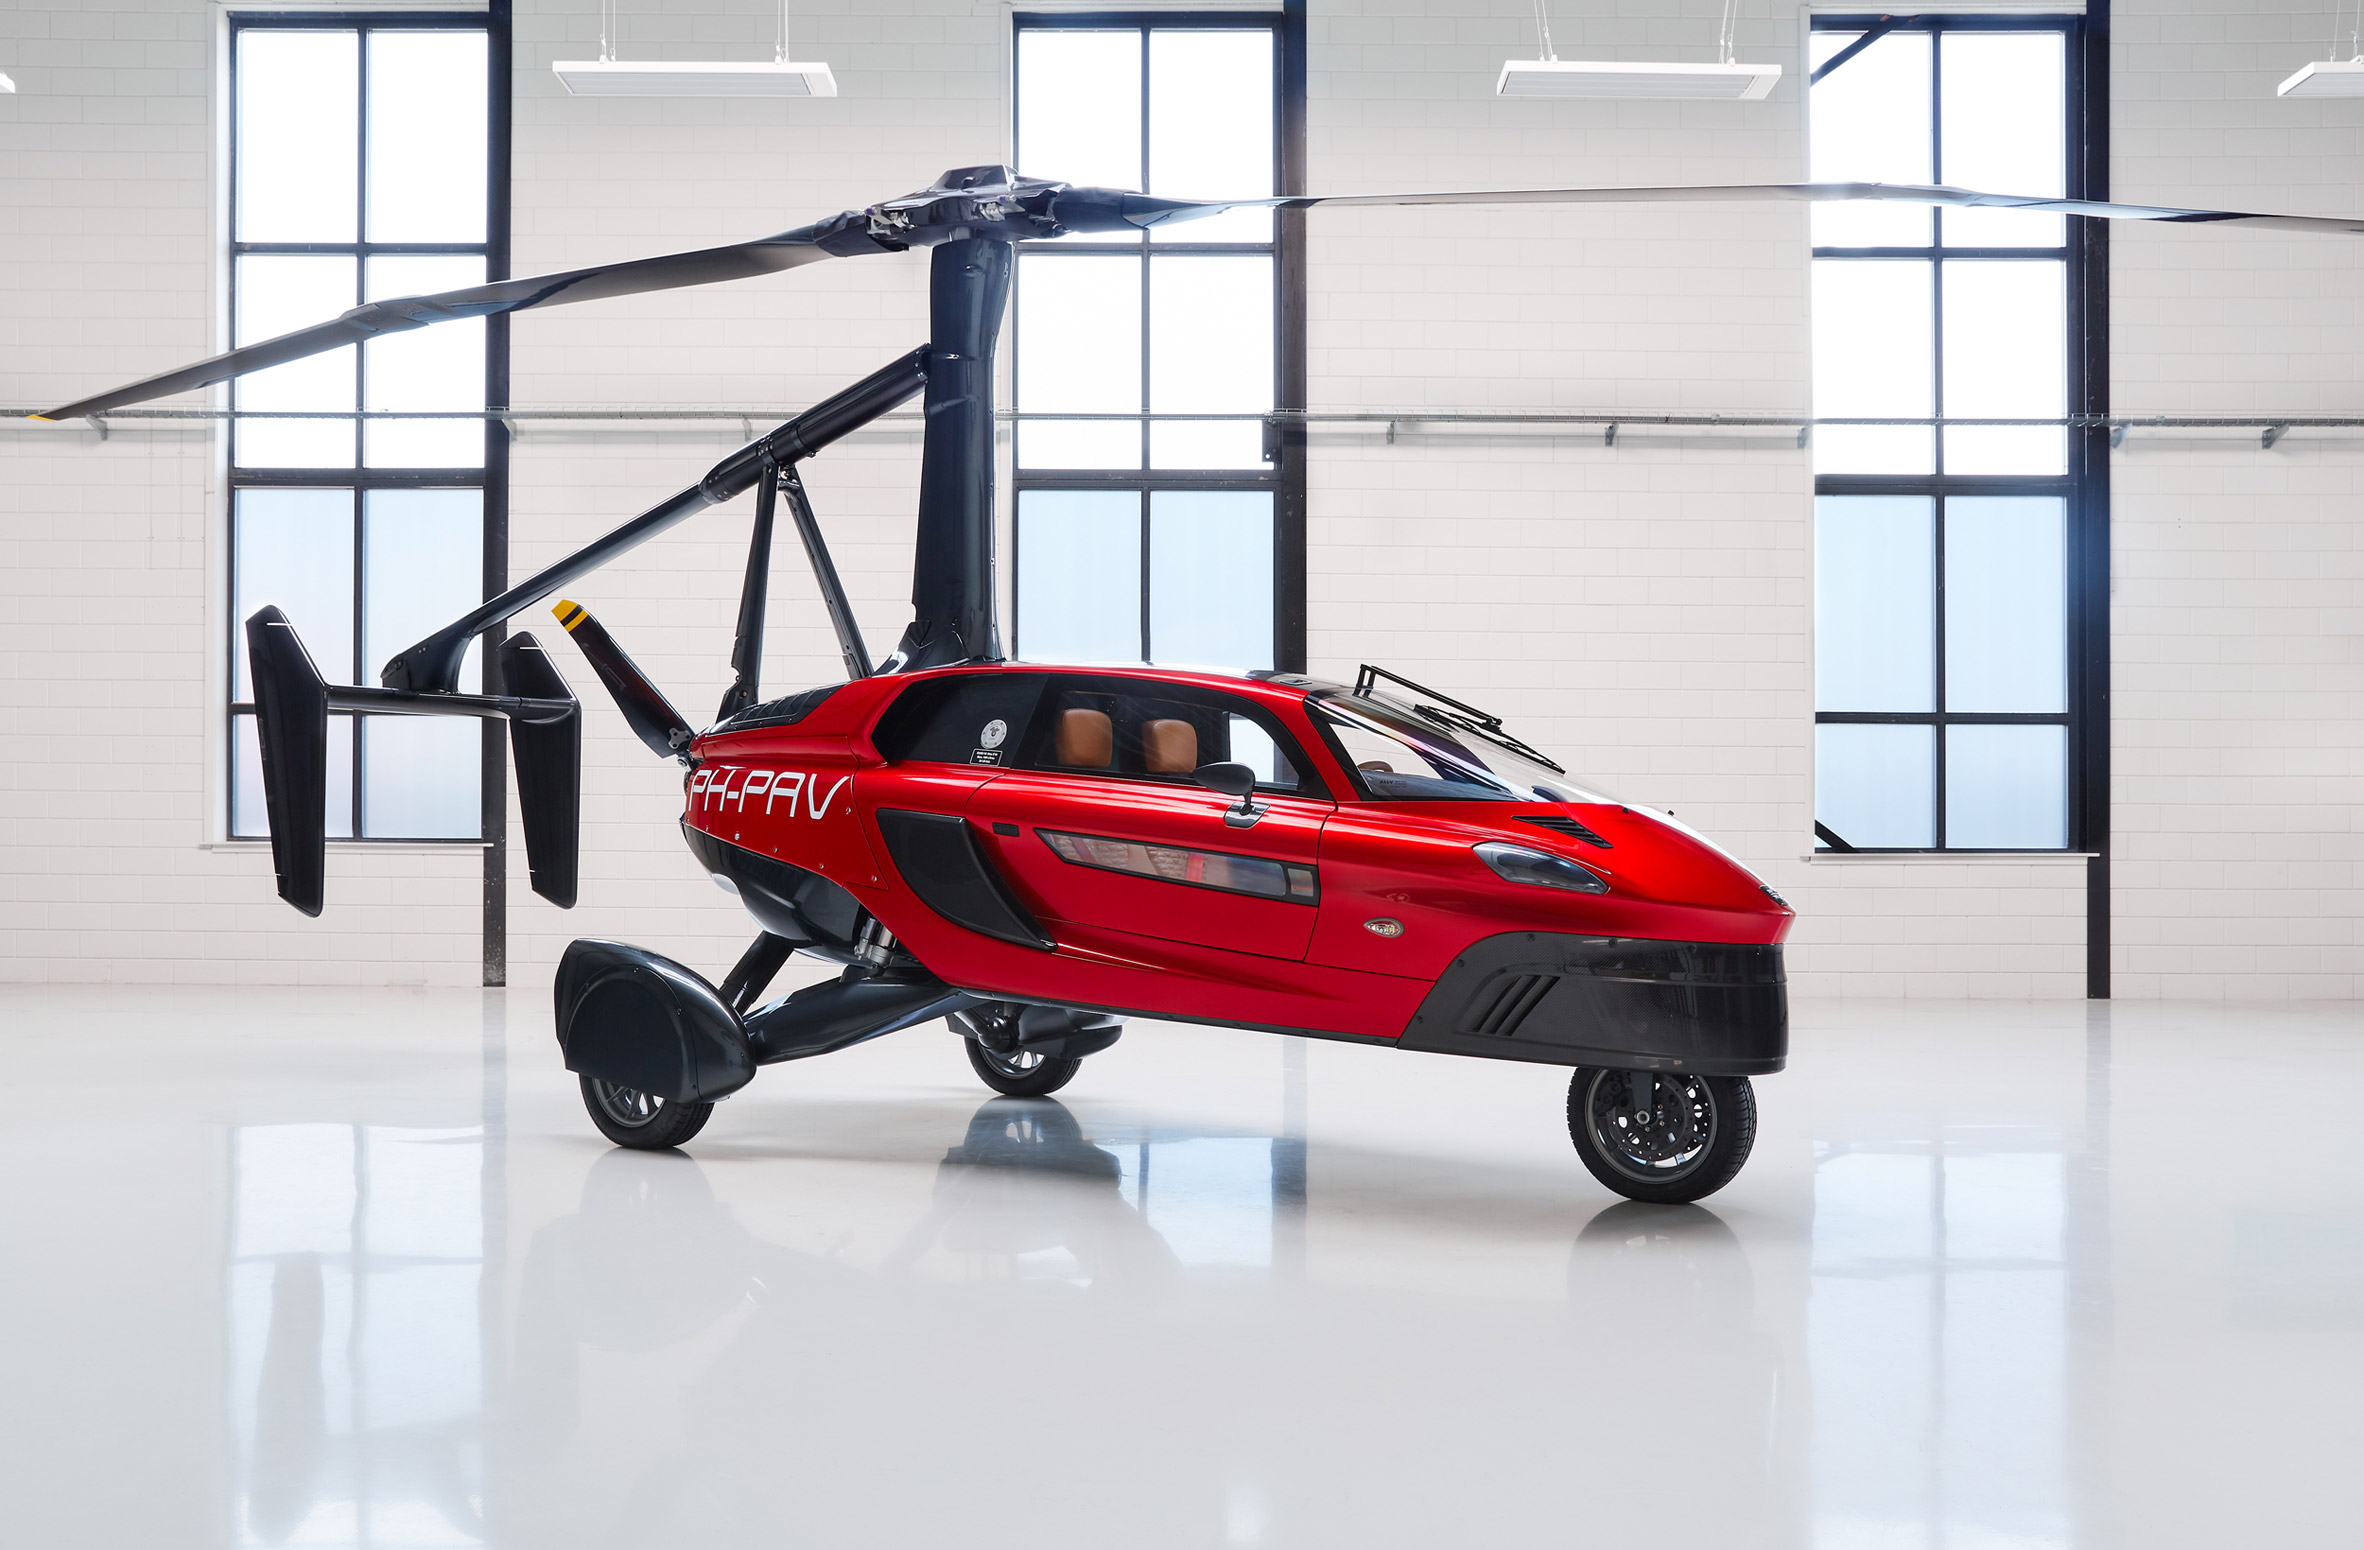 Pal-V presents "world's first" certified commercial flying car